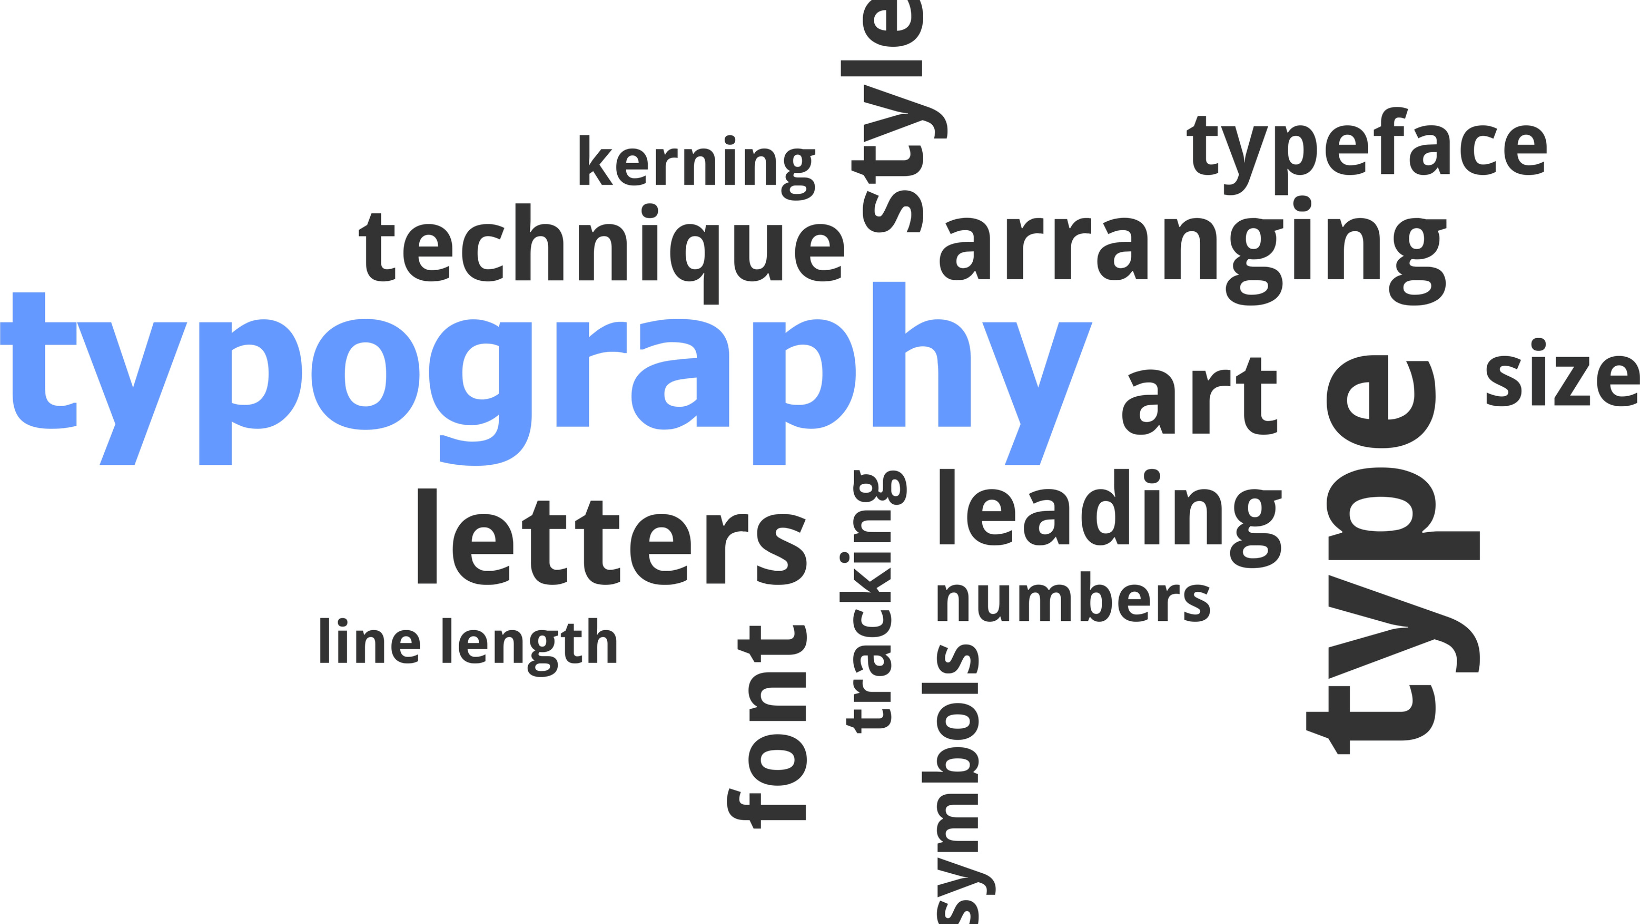 typography design of words in text